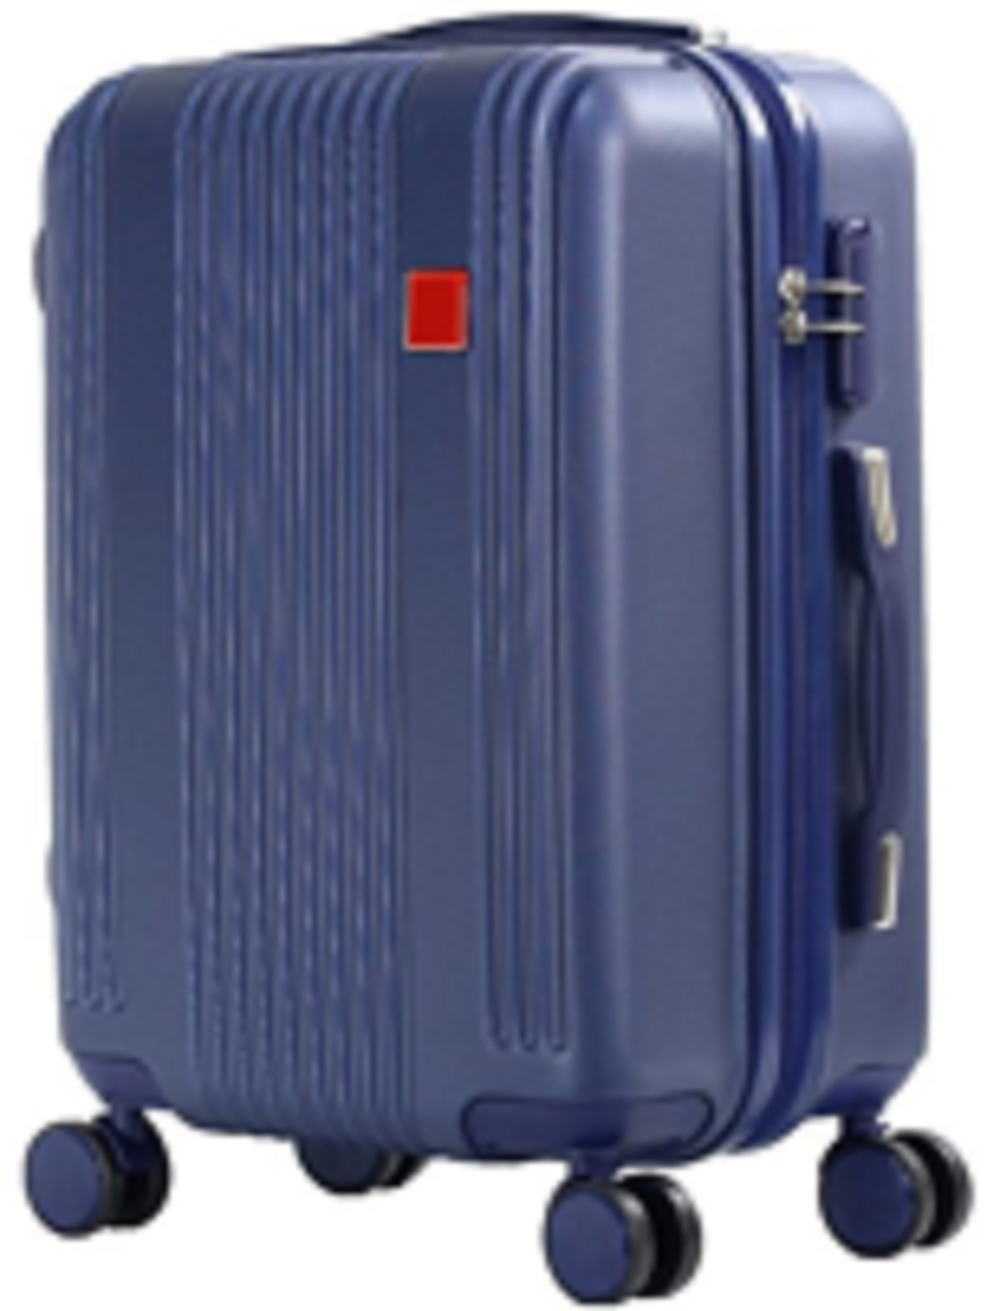 Abs Luggage